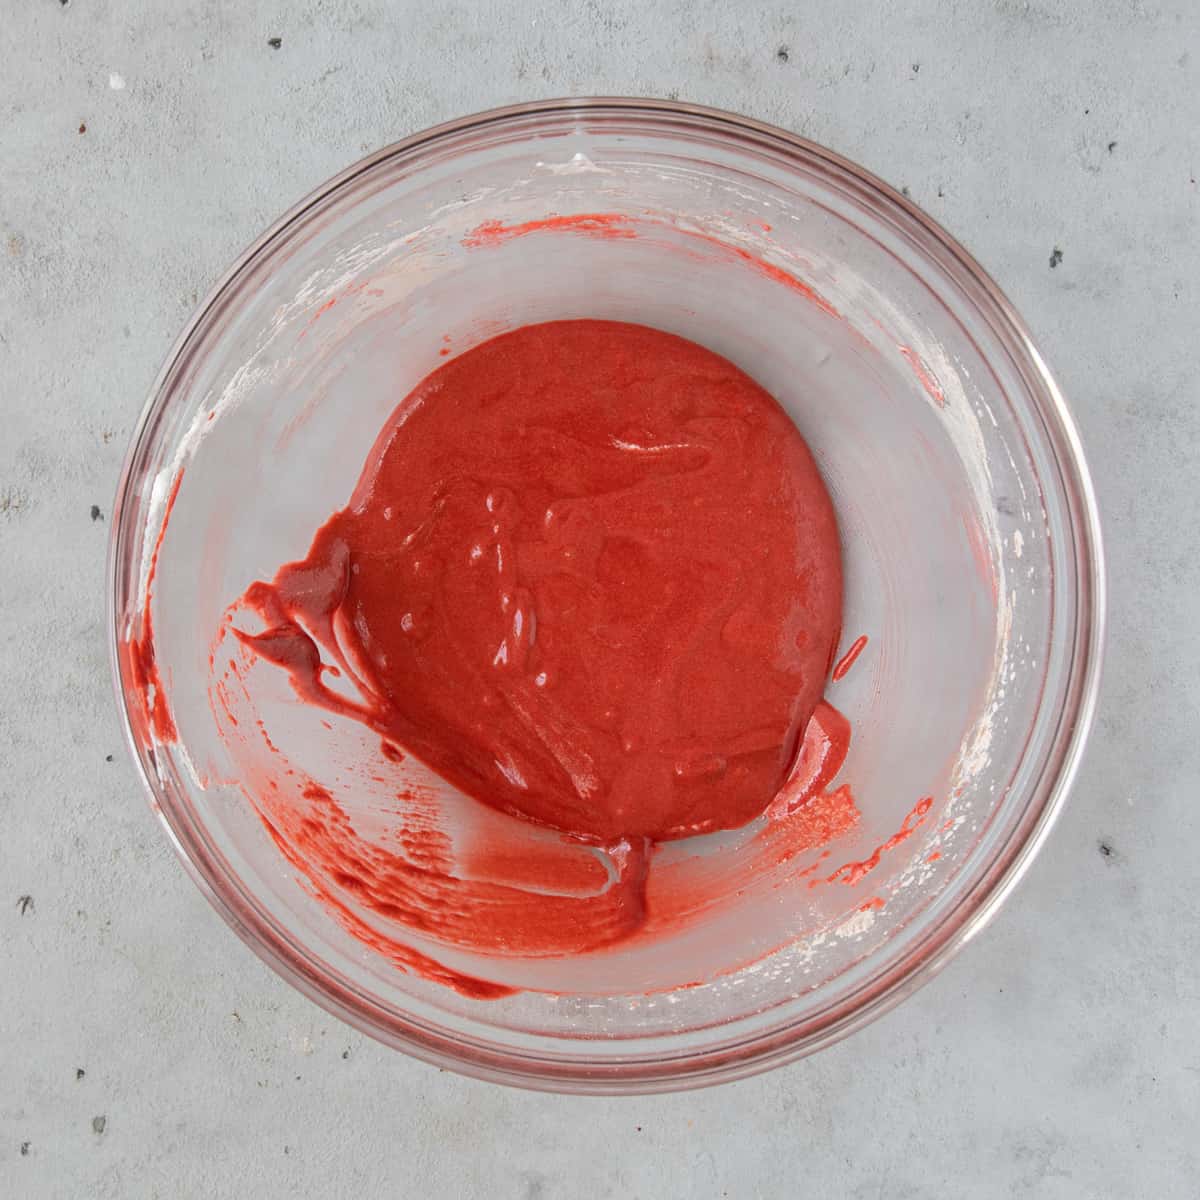 the completed macaron batter in a glass bowl on a grey background